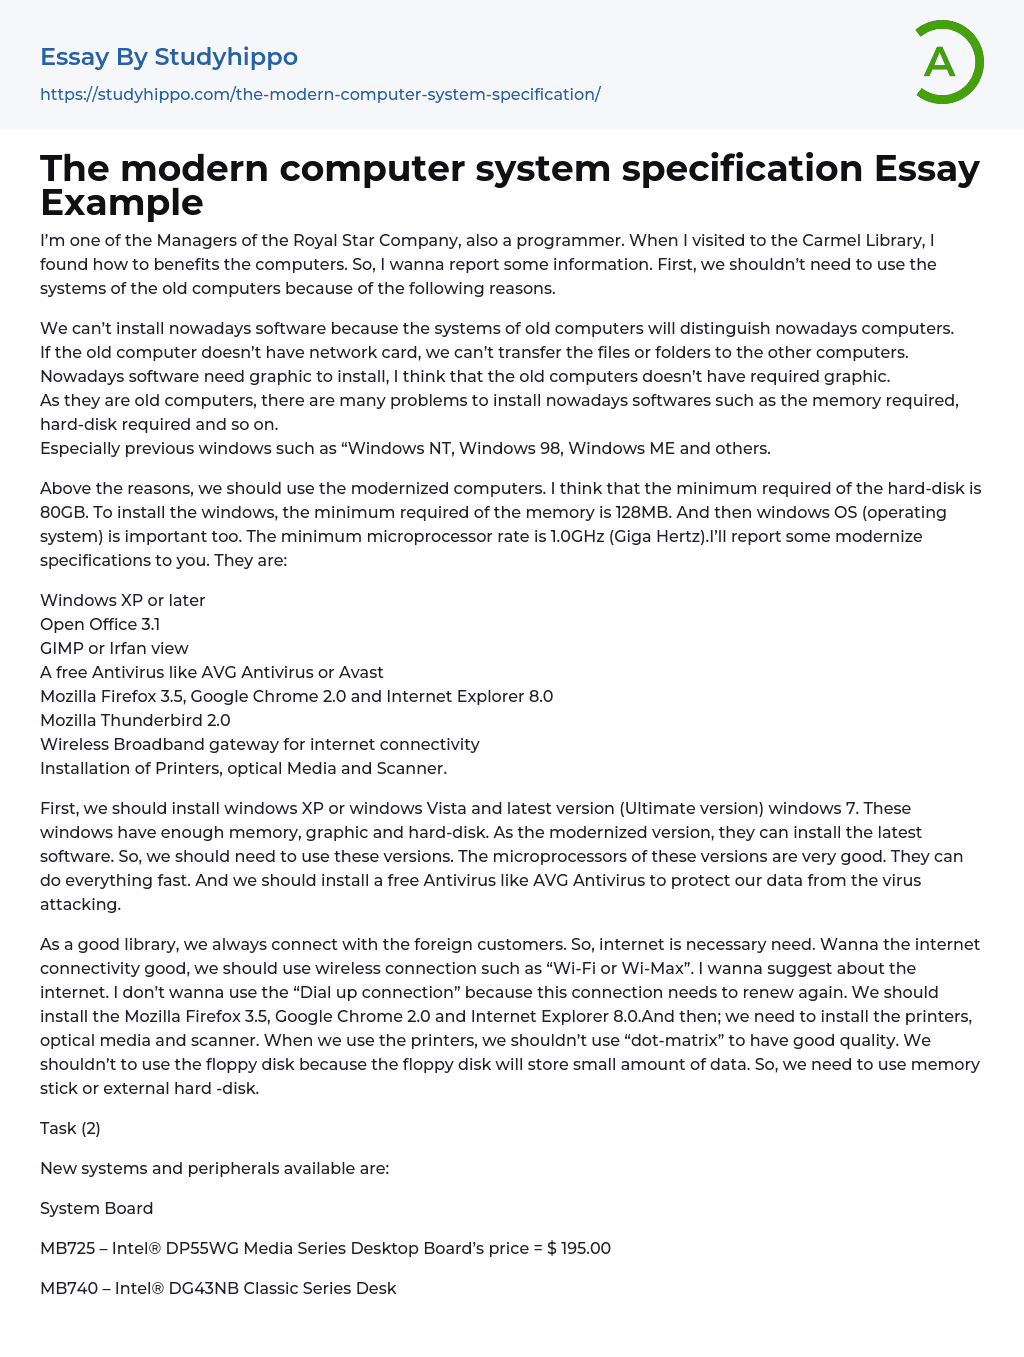 The modern computer system specification Essay Example